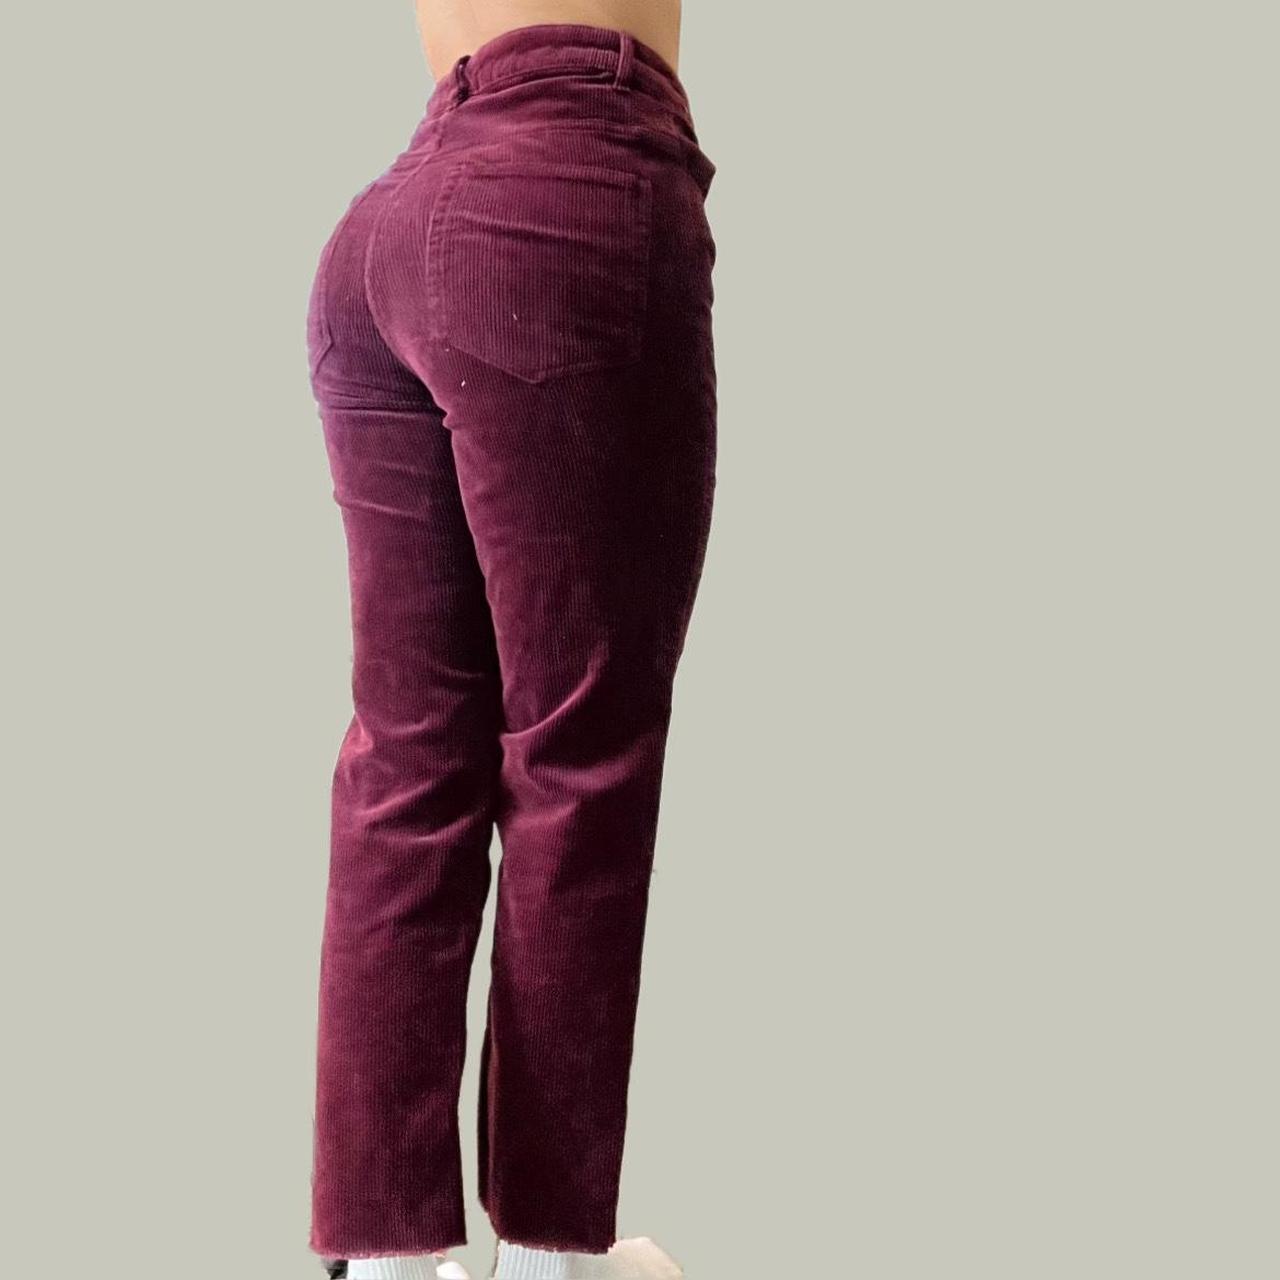 & Other Stories straight leg cord pants in burgundy | ASOS